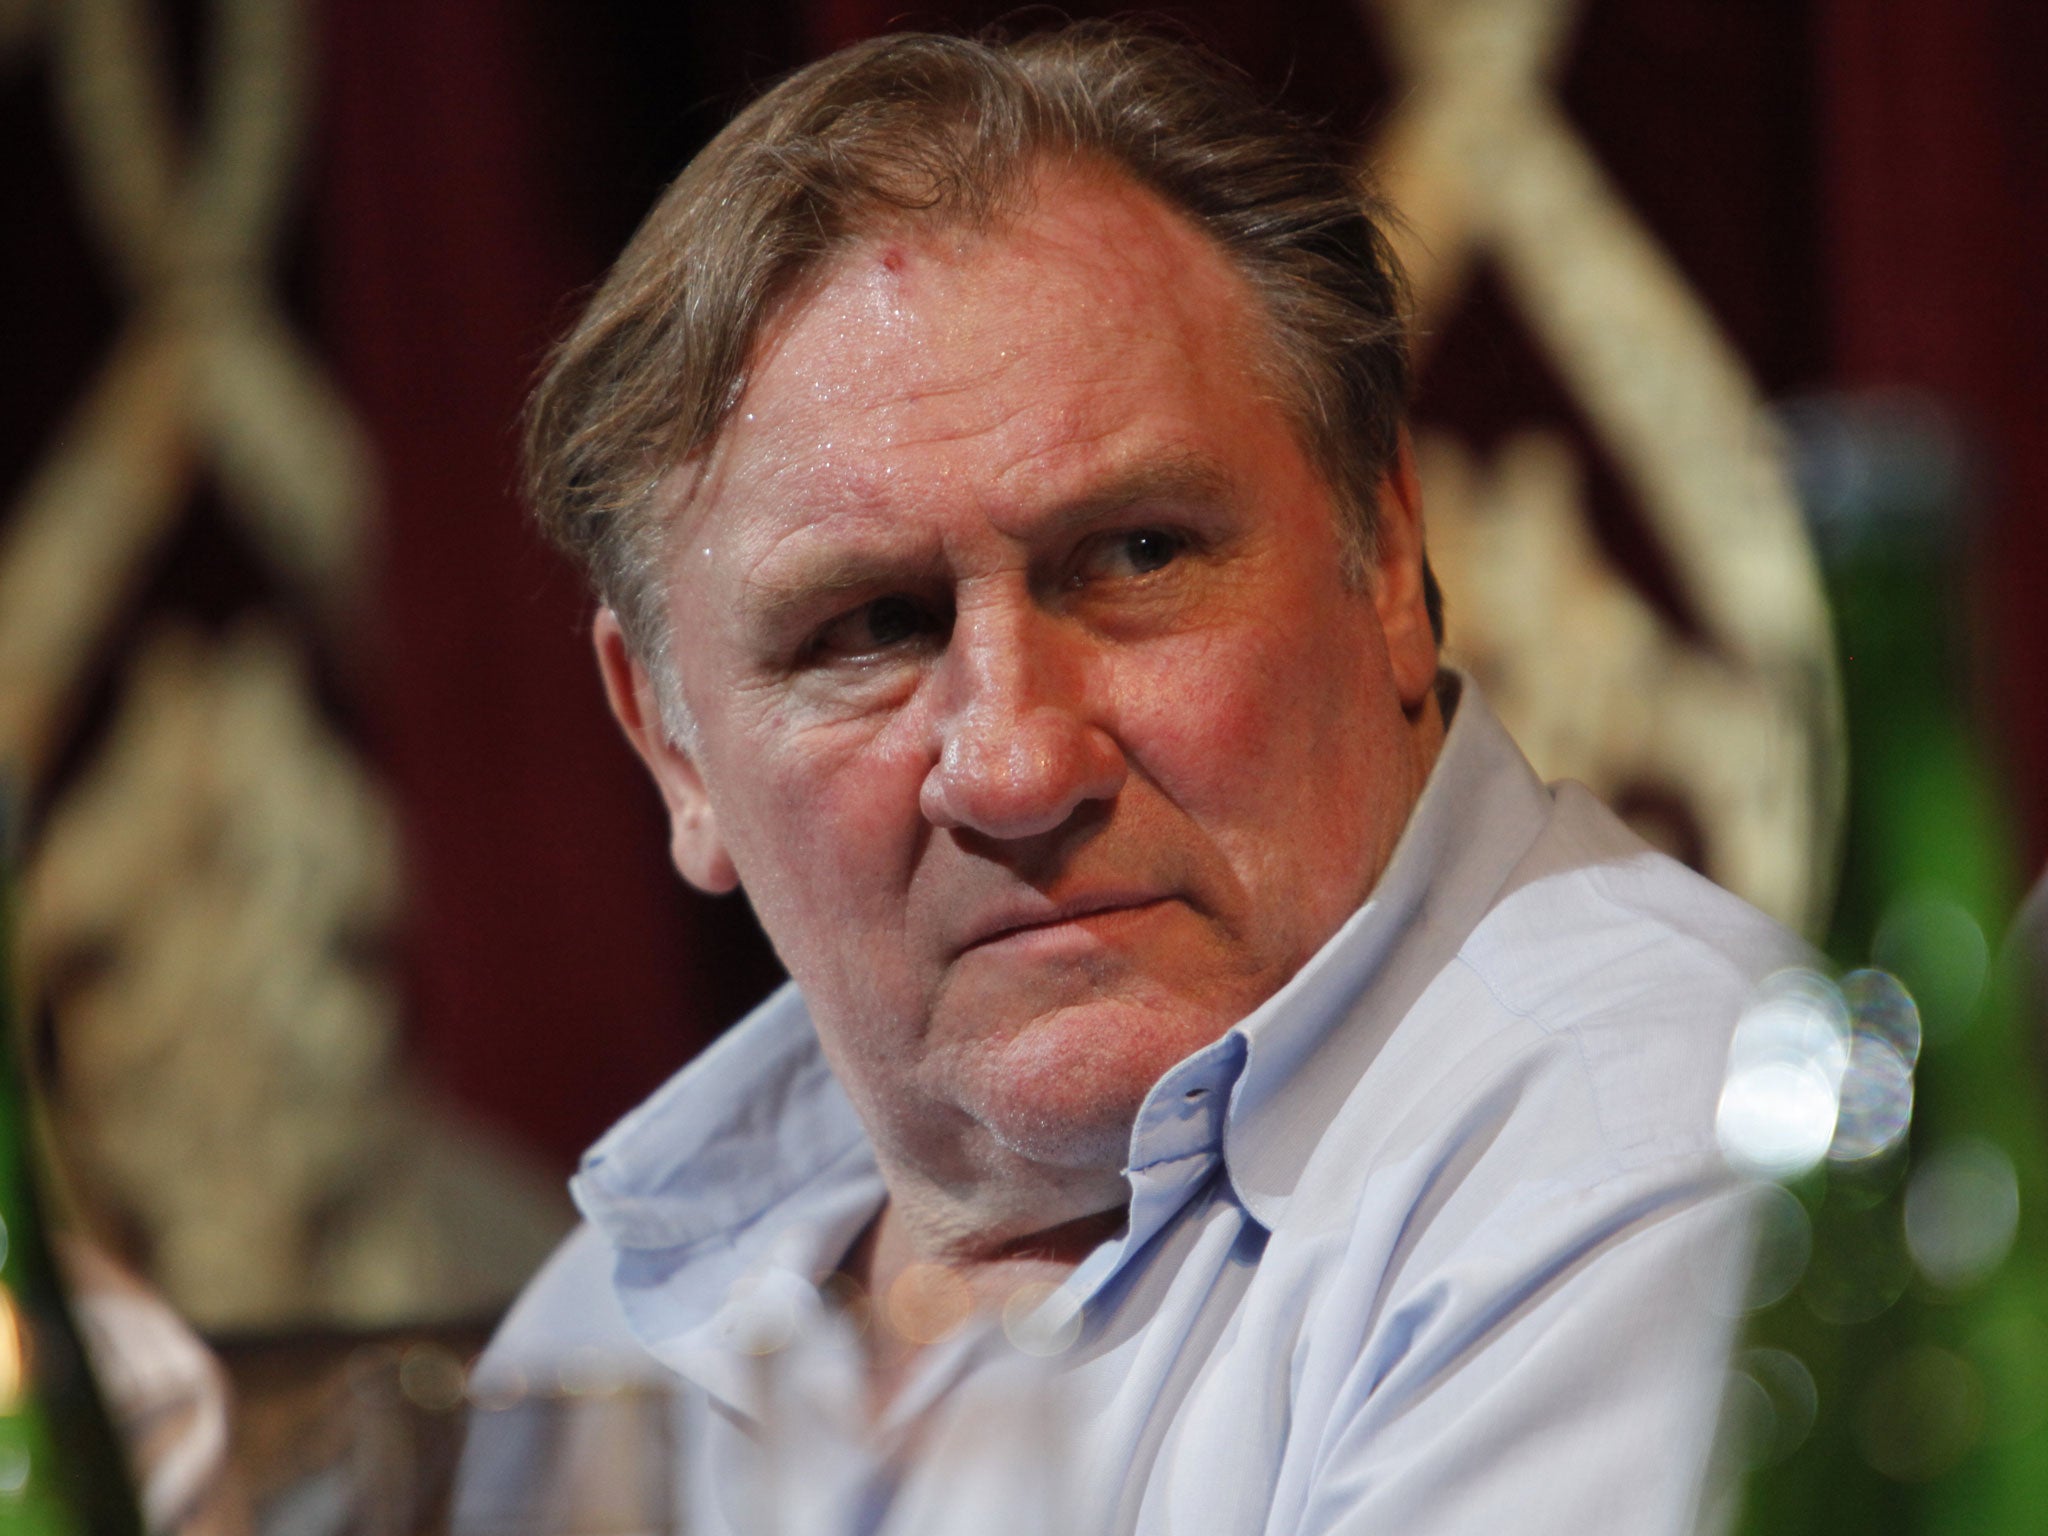 Mr Depardieu was not in court because he was making a film in Chechnya